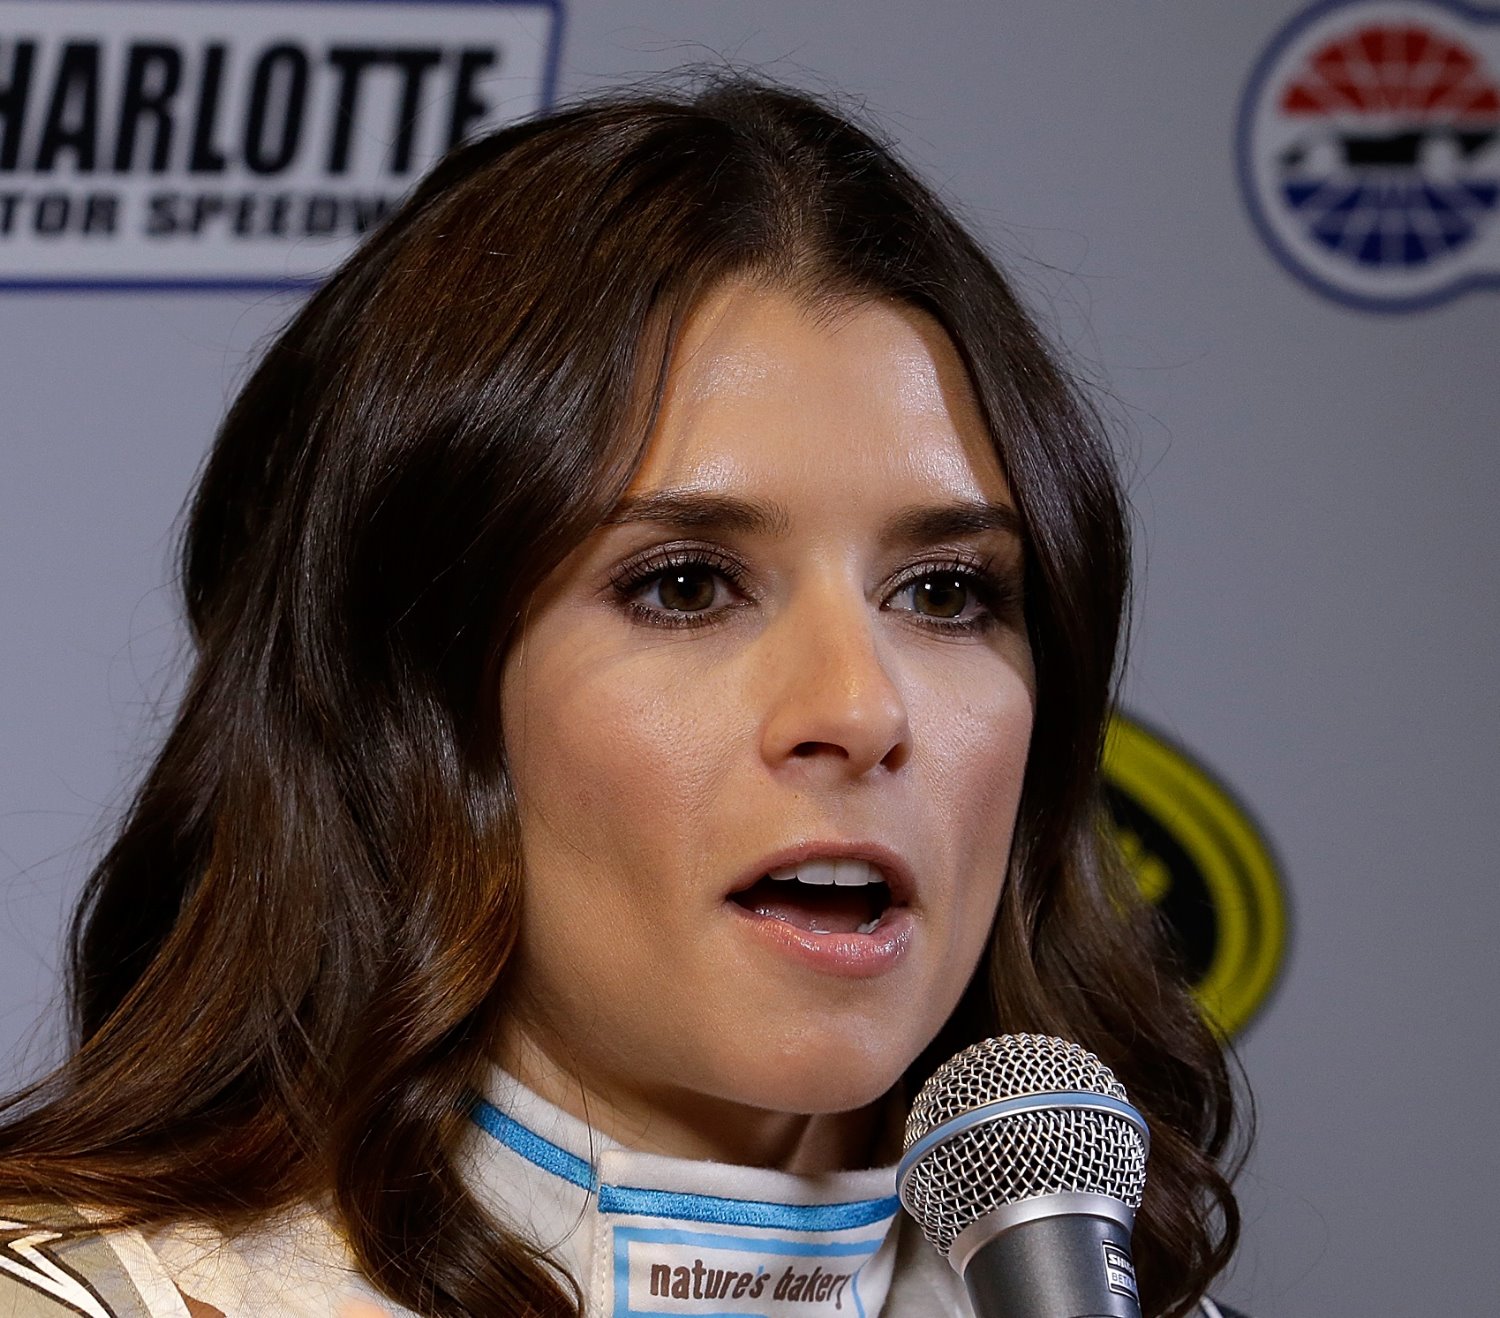 Danica Patrick: "I hope it’s not just a big argue-fest because I’ve experienced in IndyCar"